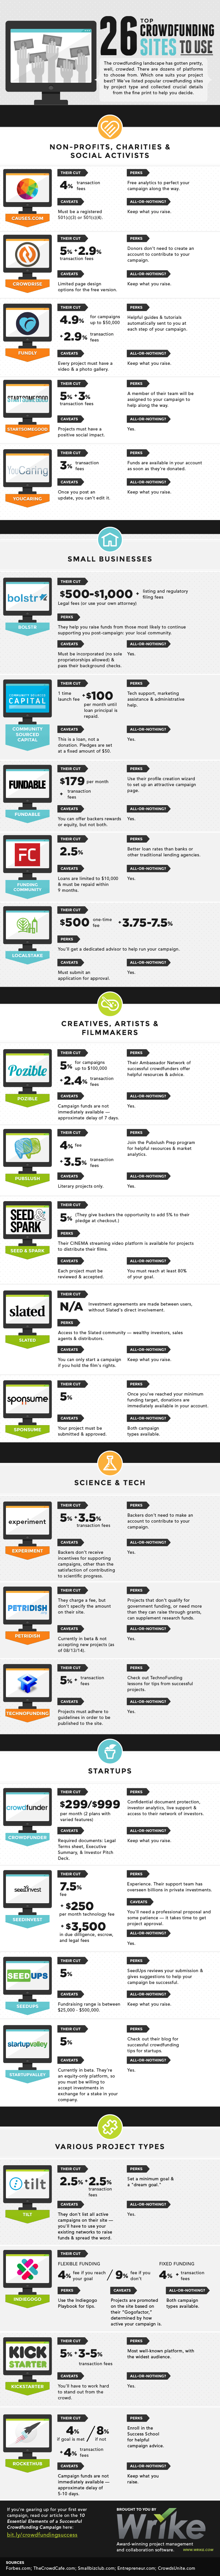 26 Top Crowdfunding Sites to Use for Your Next Campaign #infographic